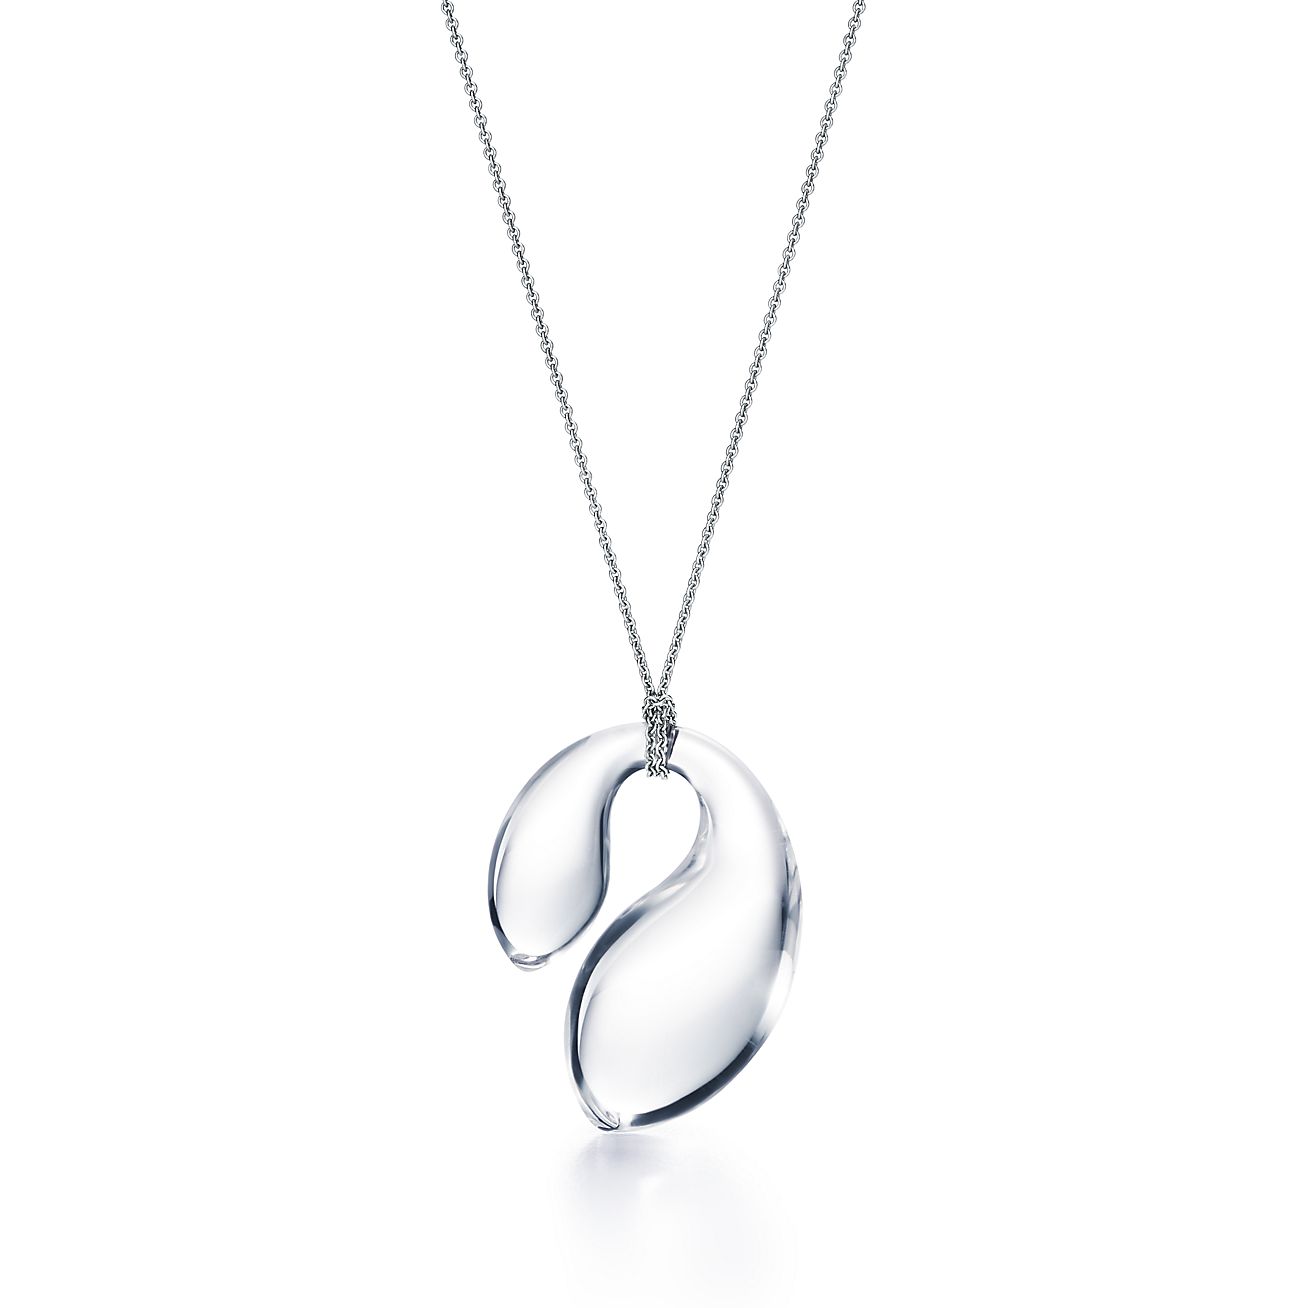 Elsa Peretti® Teardrop pendant of rock crystal and sterling silver. | Tiffany & Co.